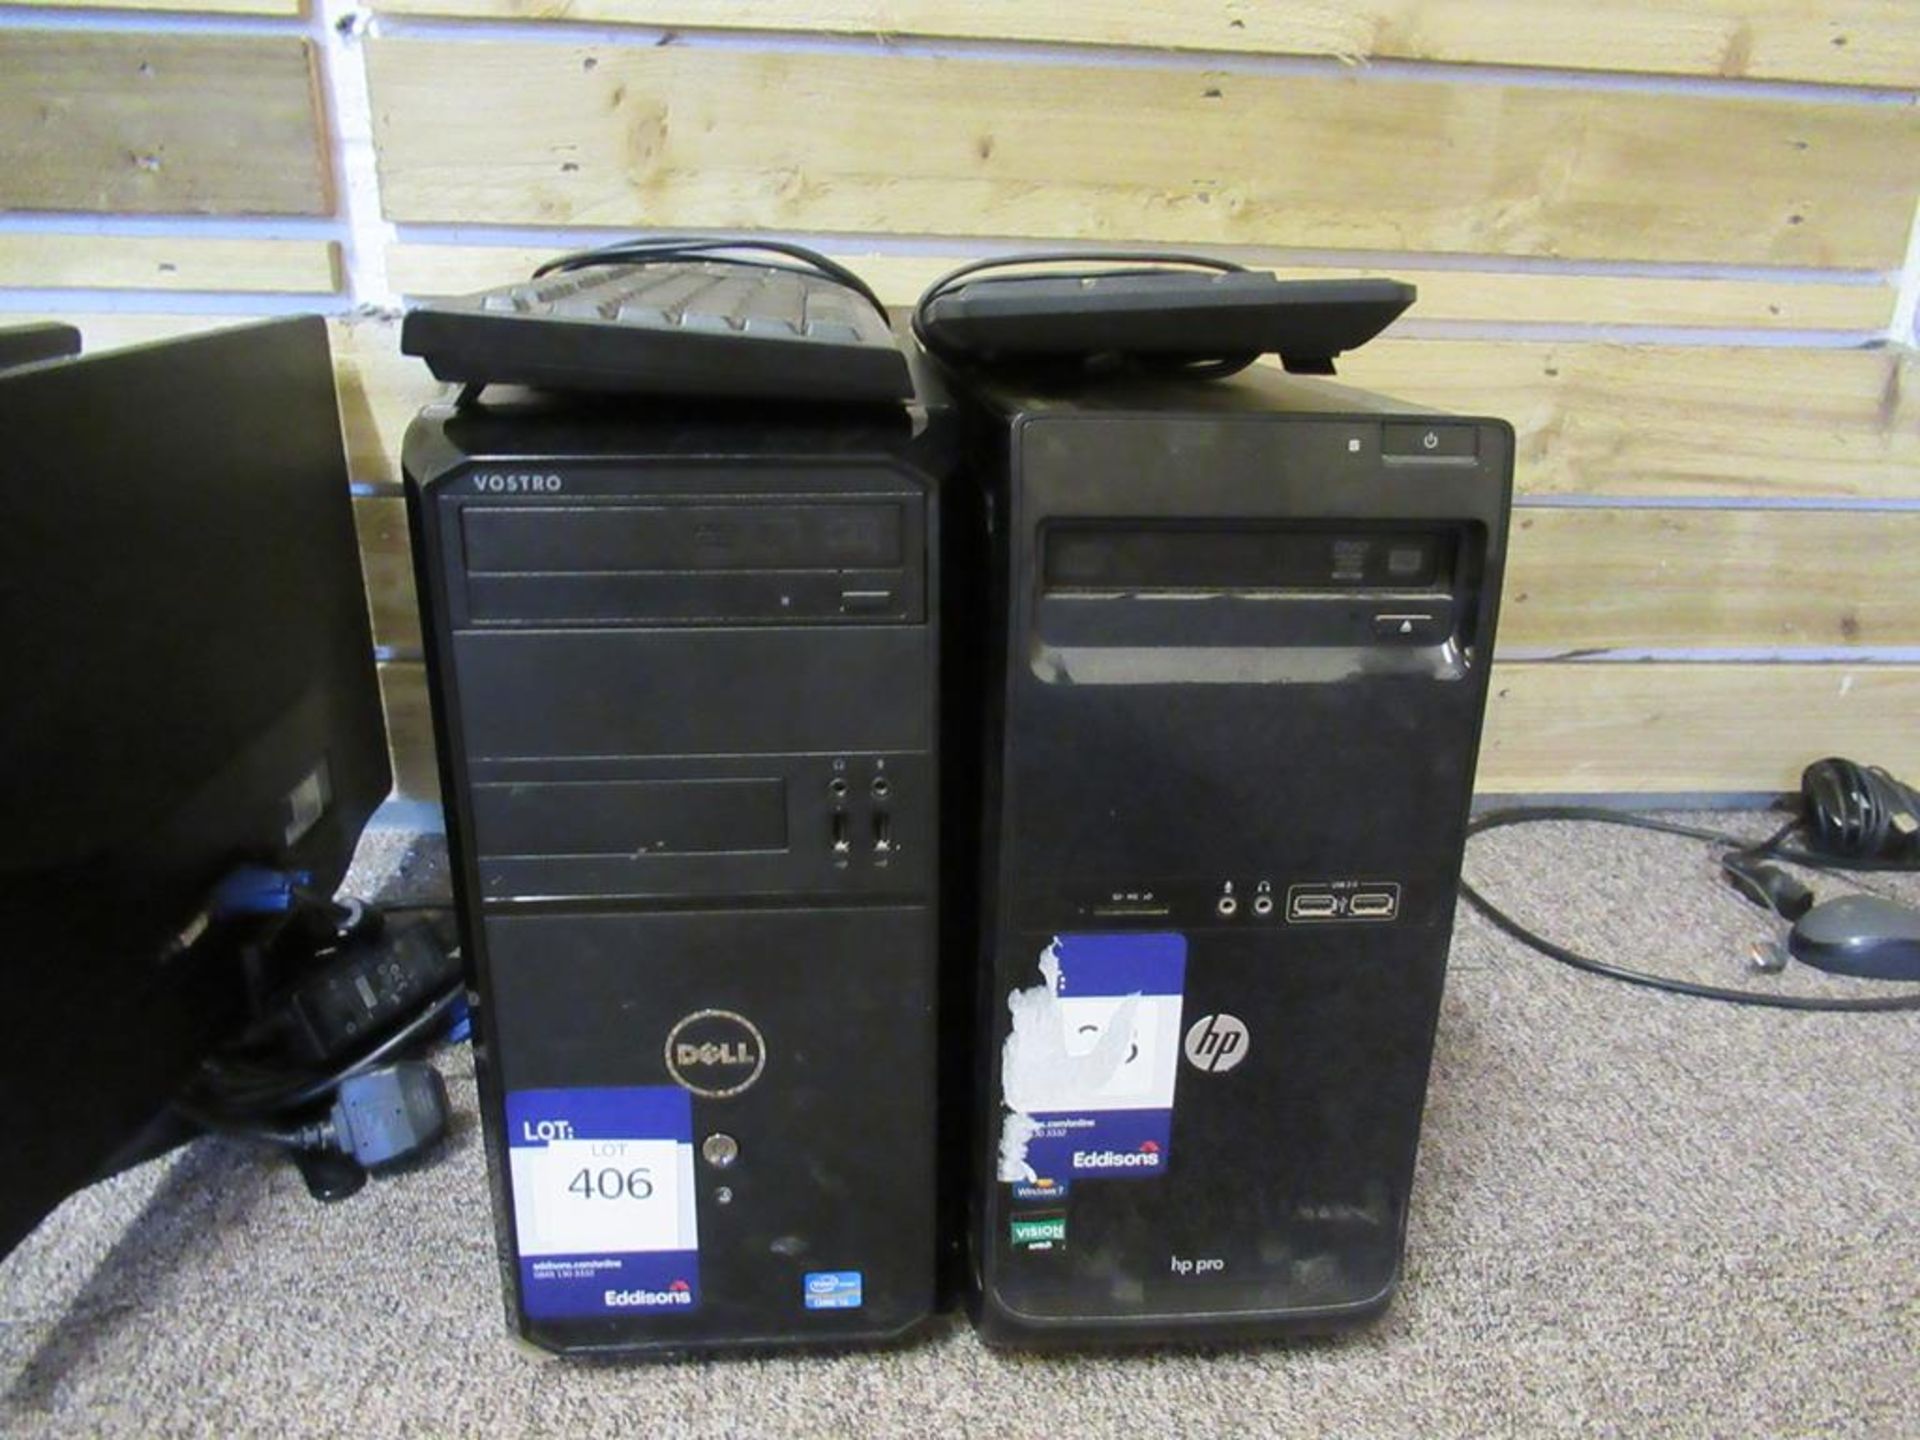 PC's and Monitors, along with Printers. - Image 2 of 4